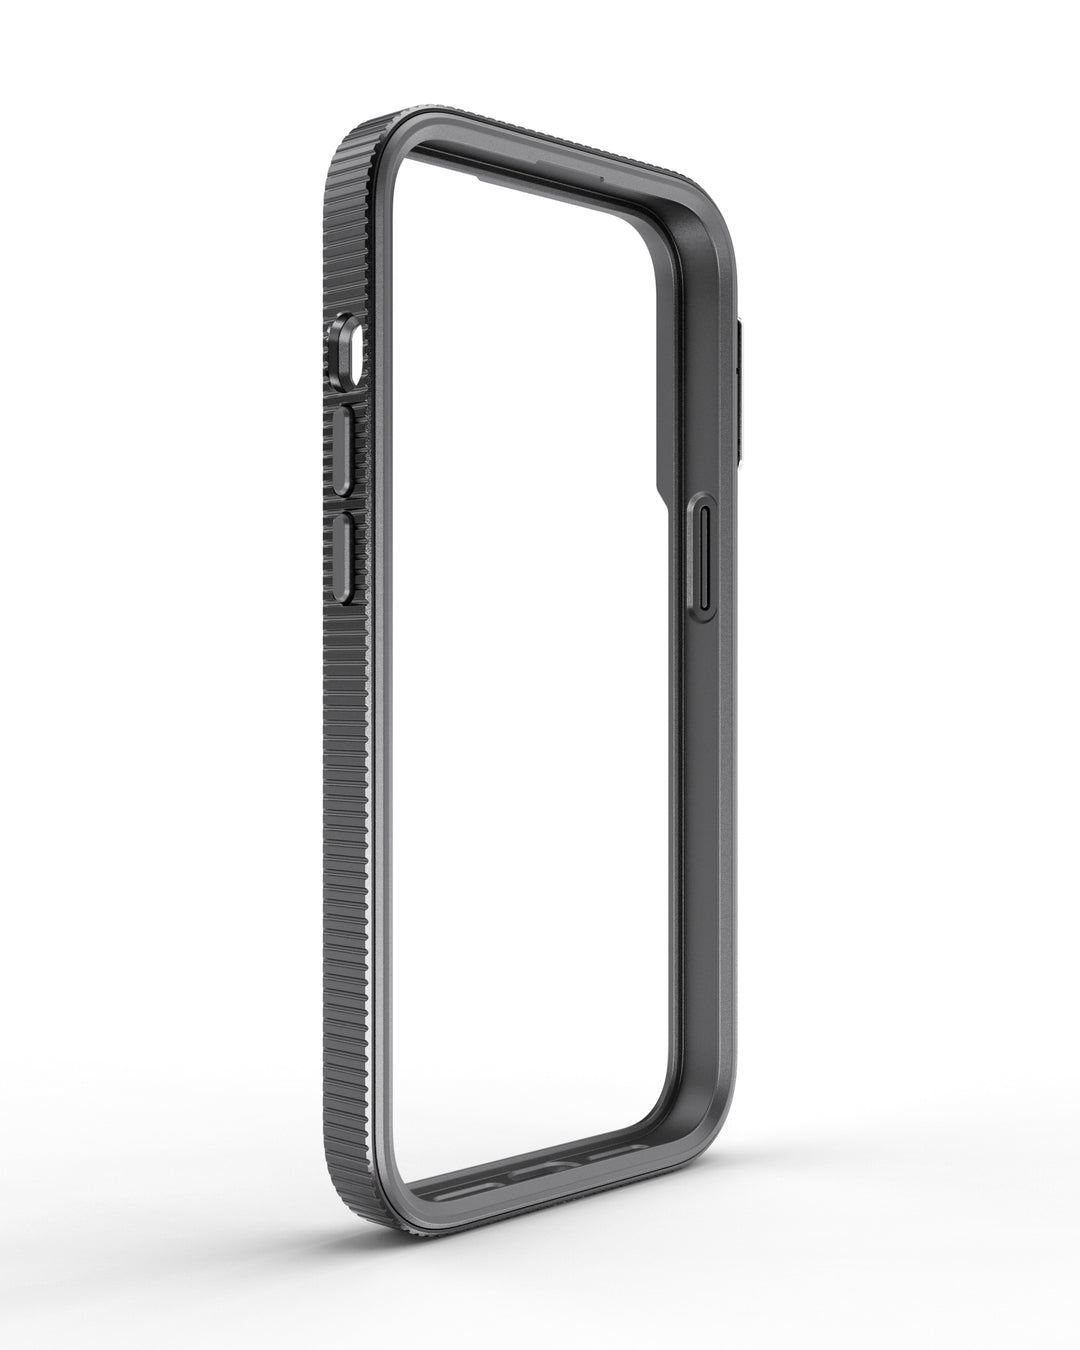 BEST Bumper Case for iPhone 14 pro max, iPhone 14 pro max cases & covers